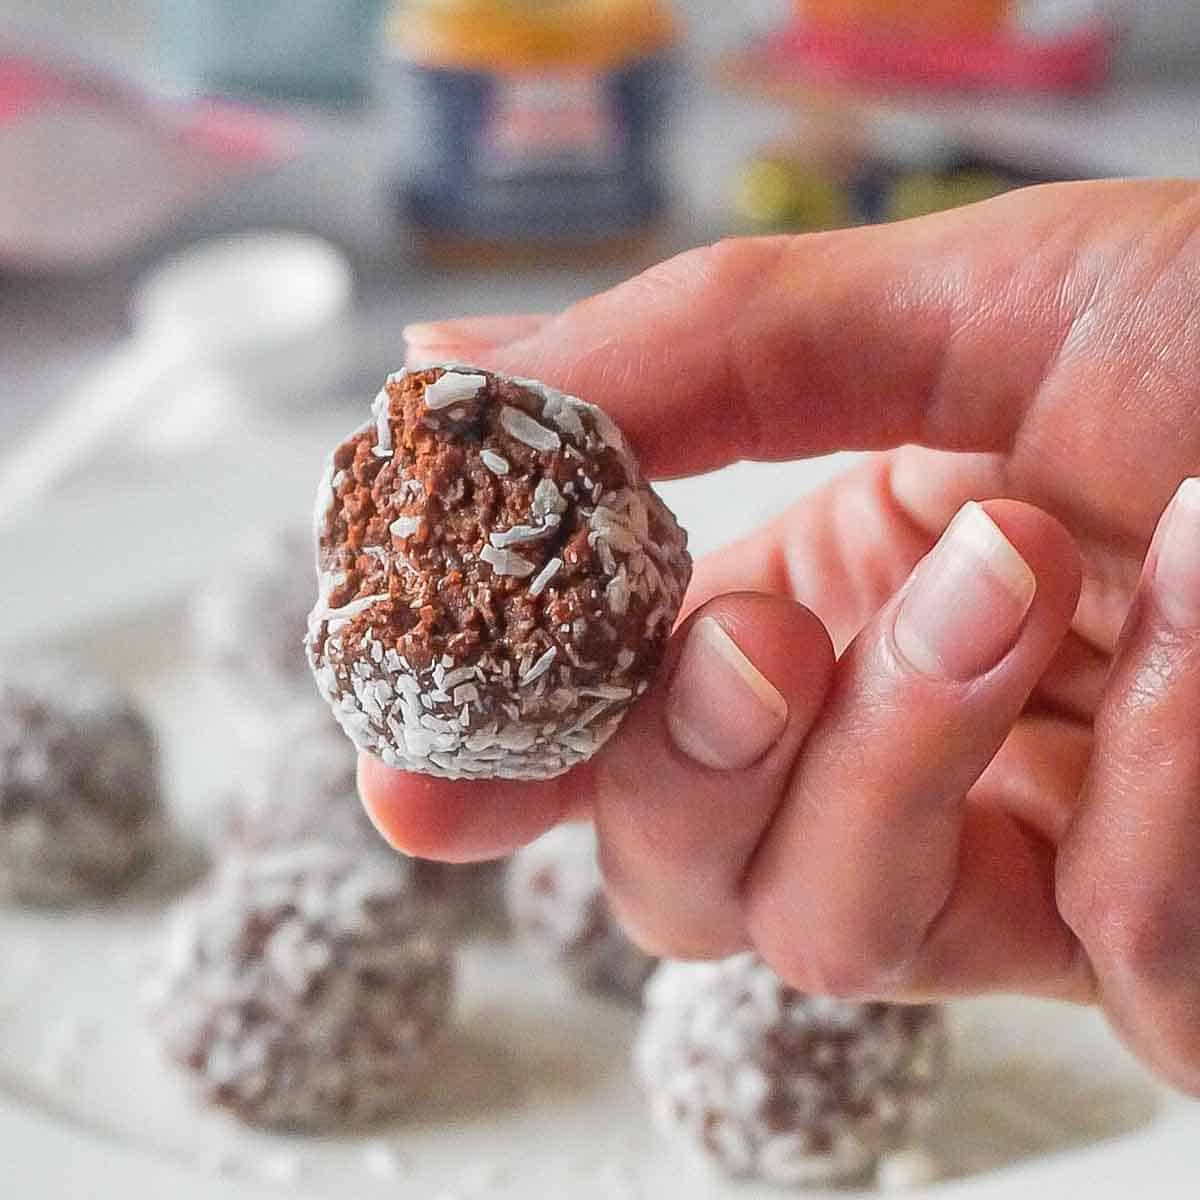 A hand holding brownie bliss ball covered in coconut flakes, one bite taken.